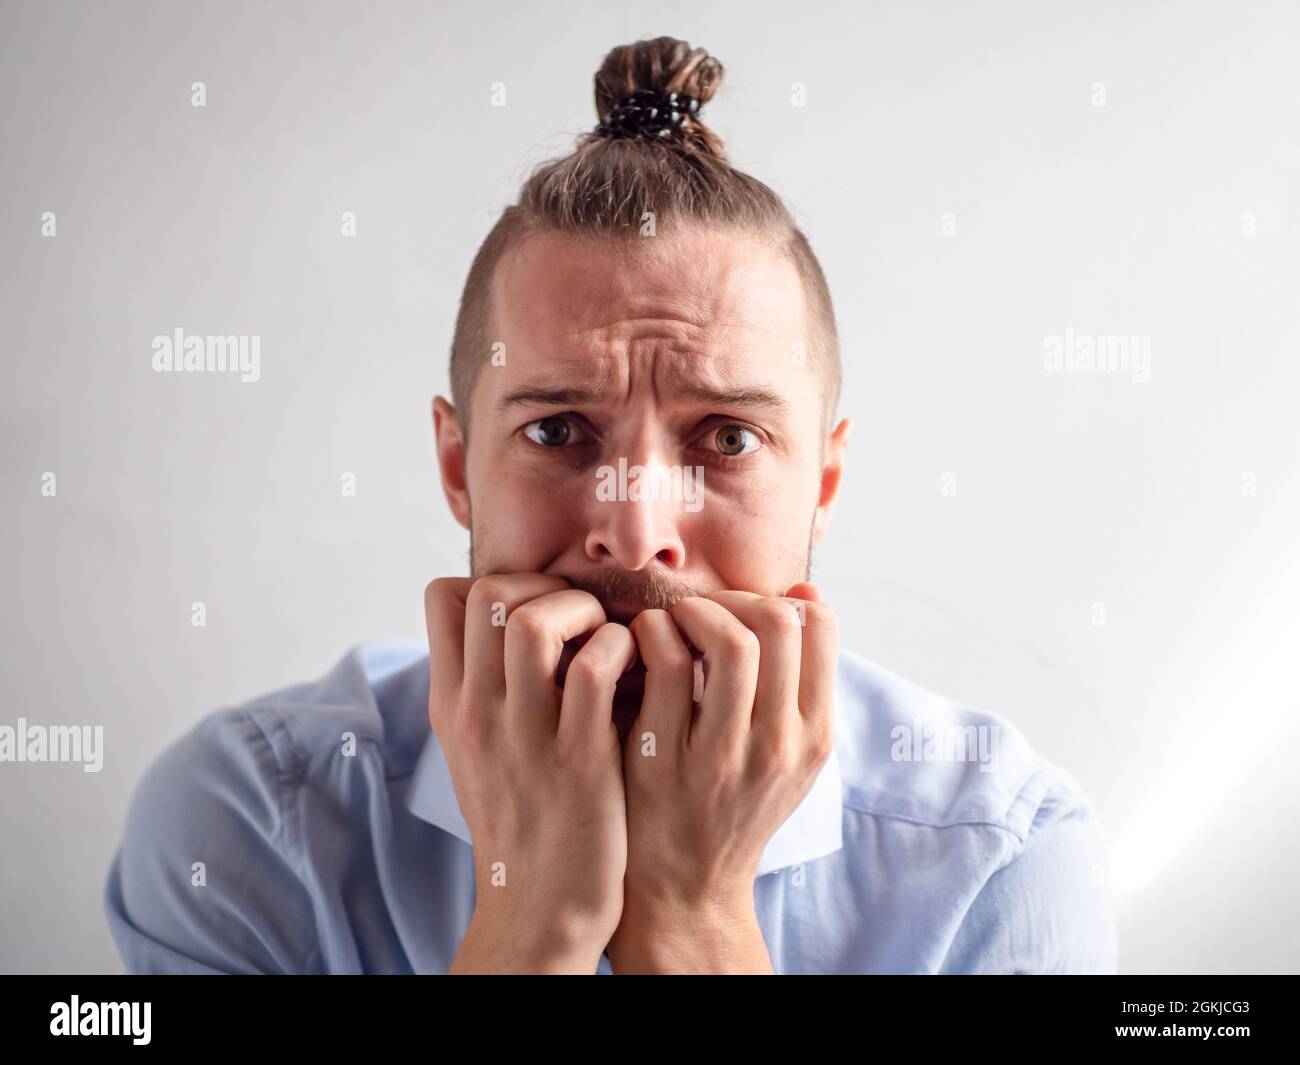 White Young Man Looks Sad, Stressed and Depressed Stock Photo